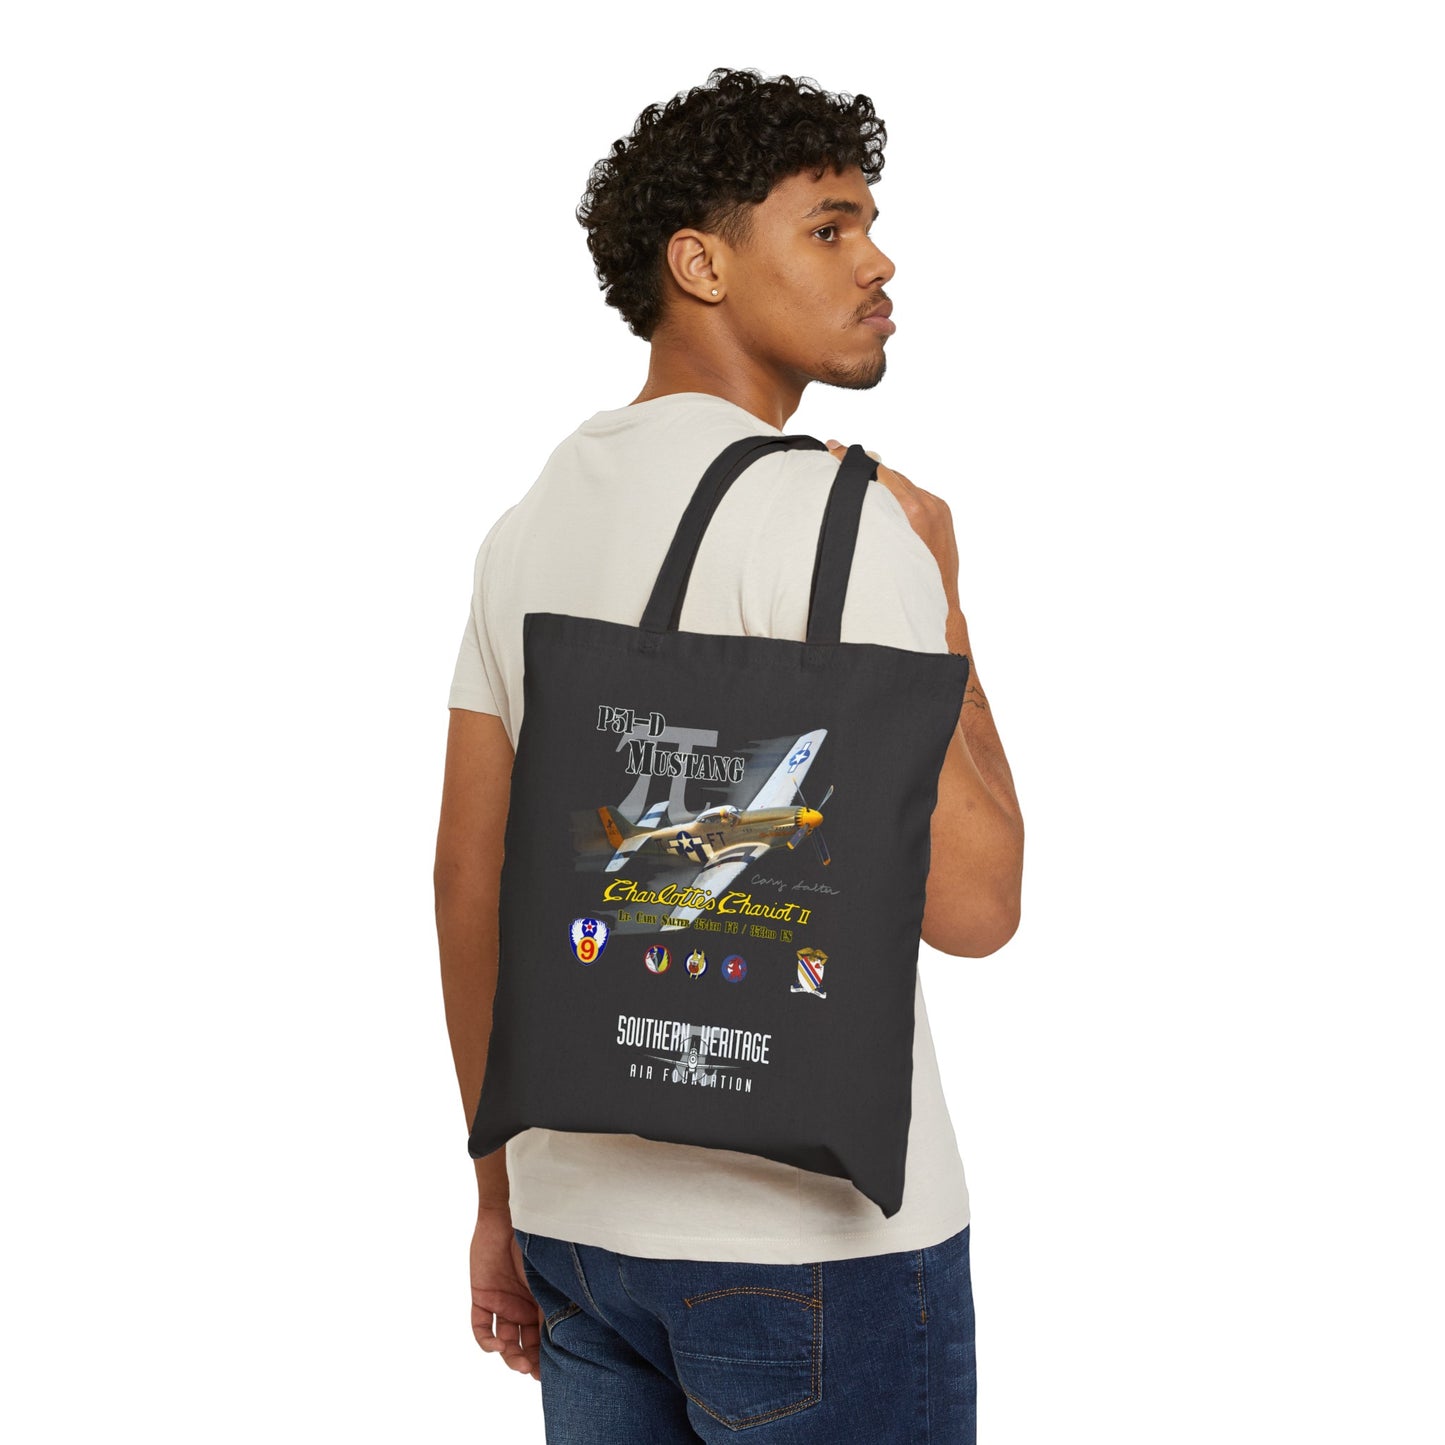 Southern Heritage Aviation Foundation Cotton Canvas Tote Bag